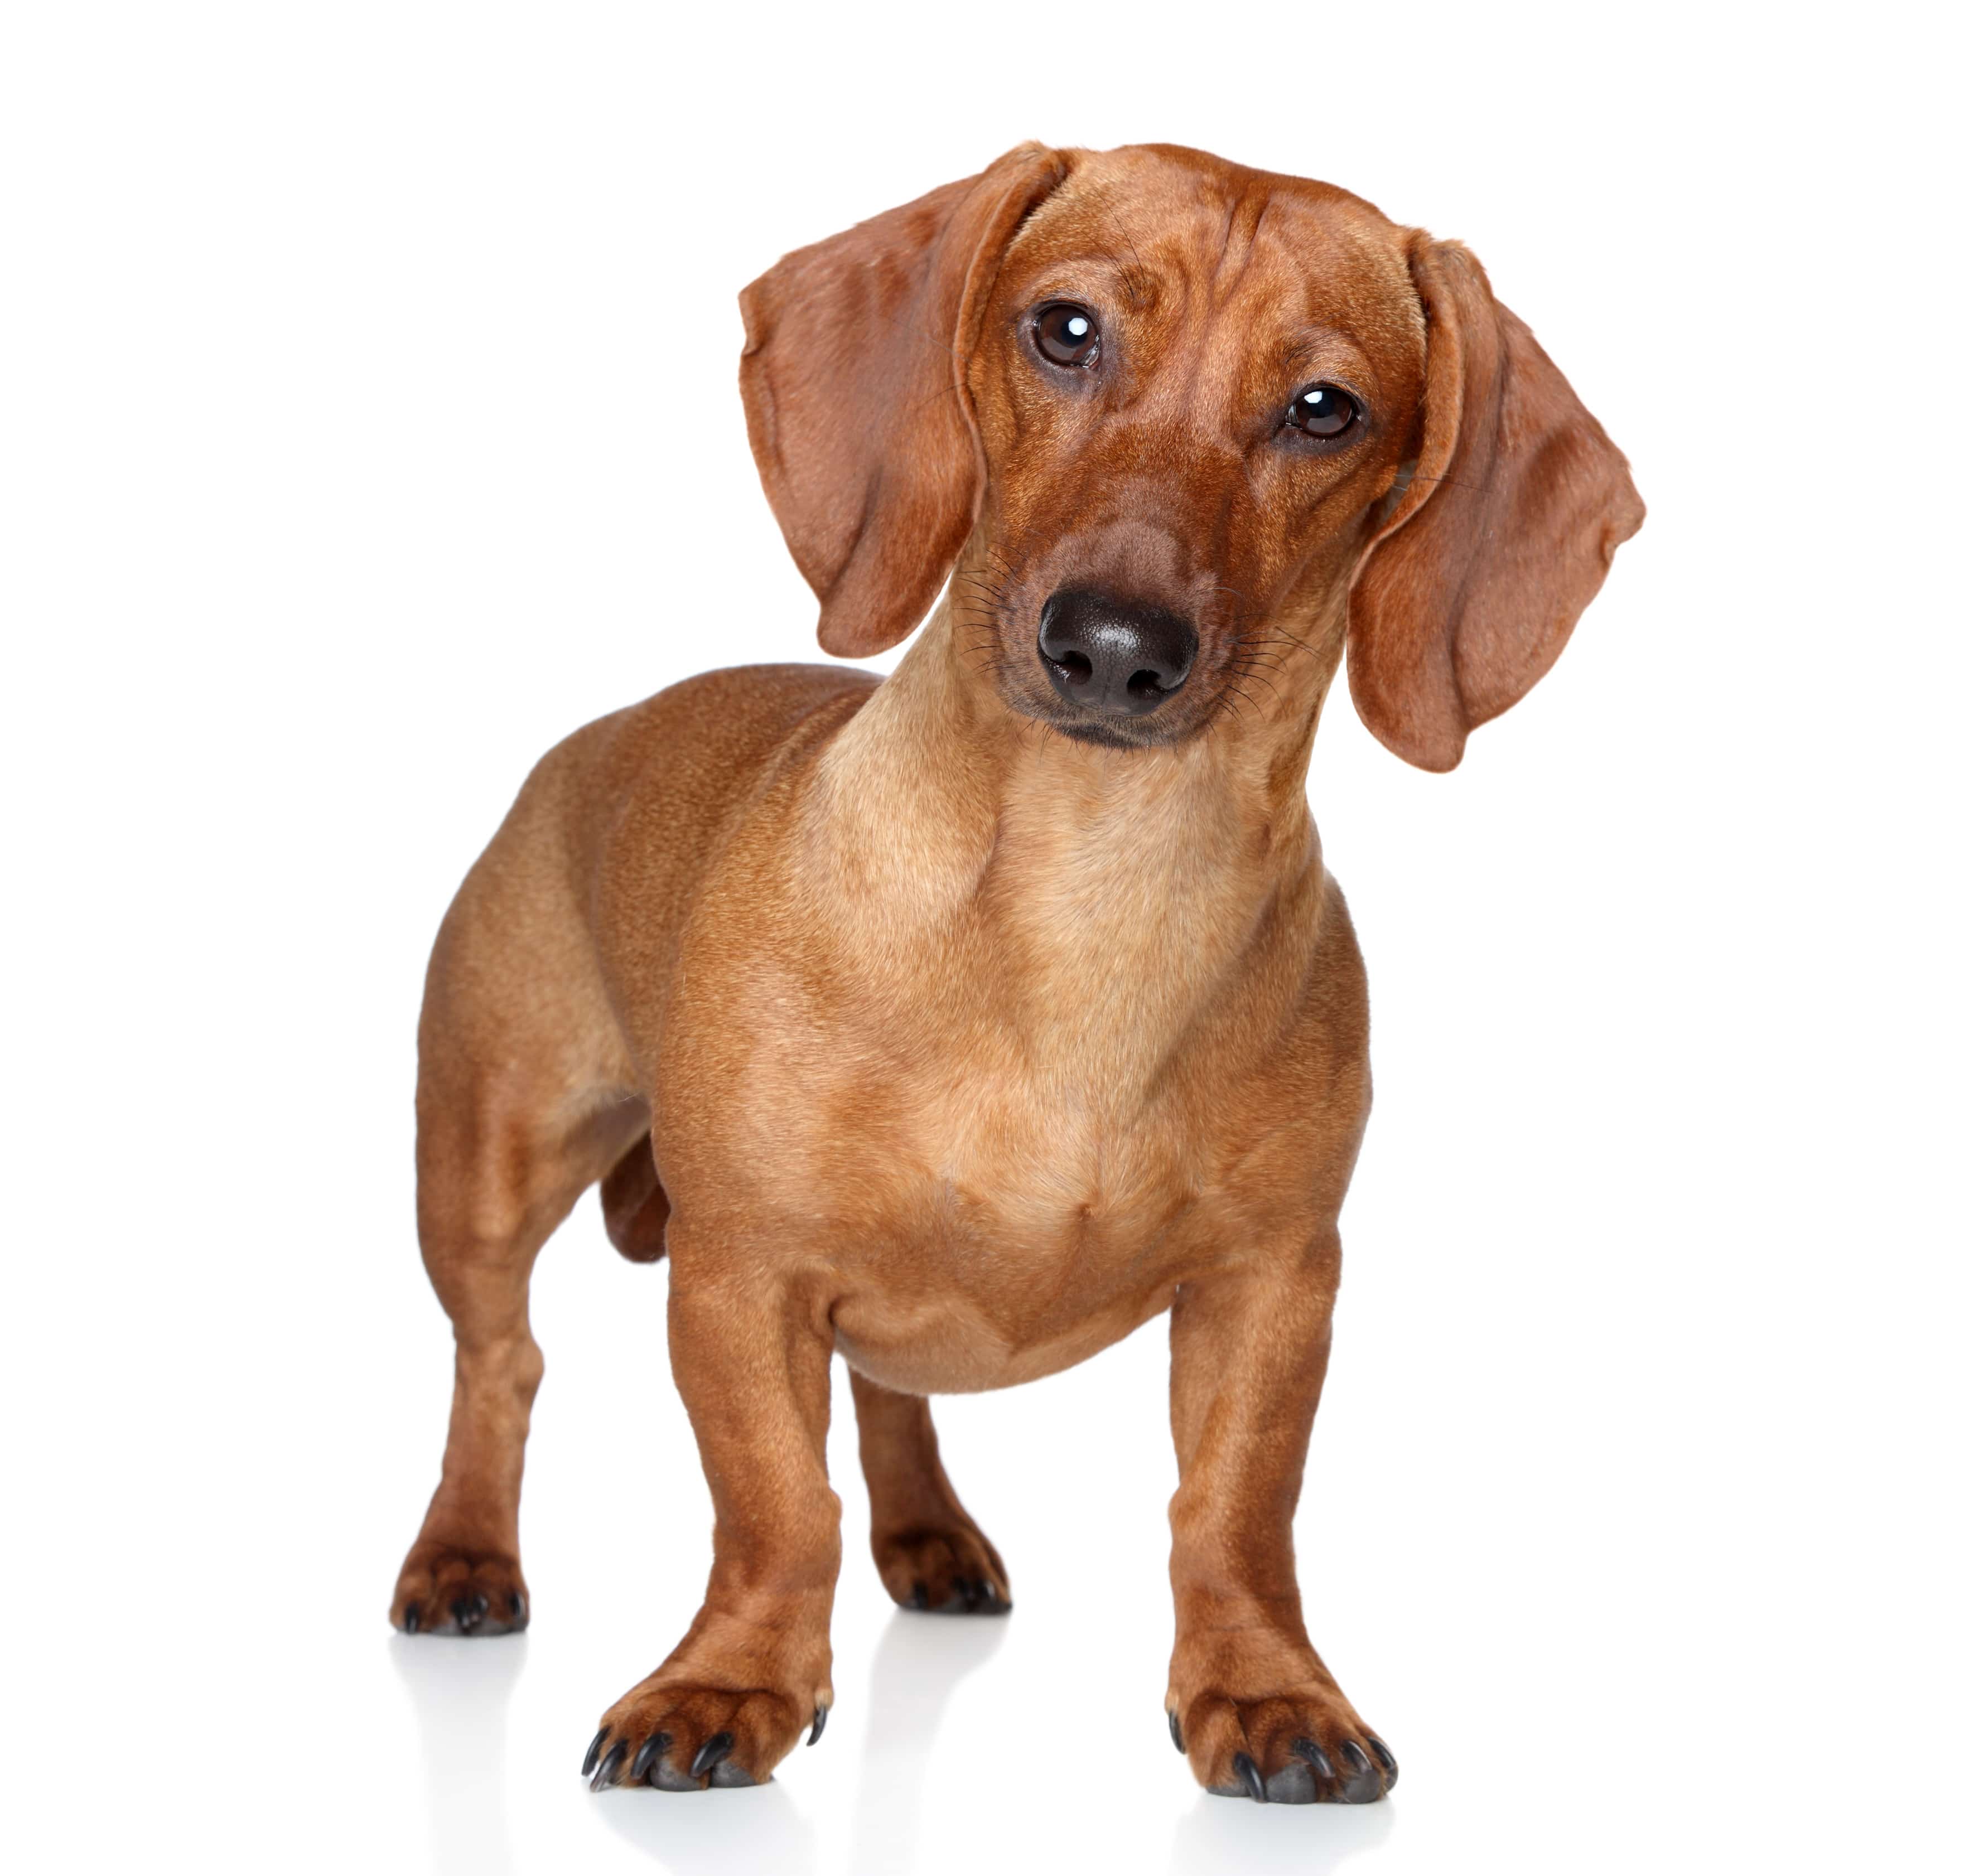 Brown dachshund stand on a white background